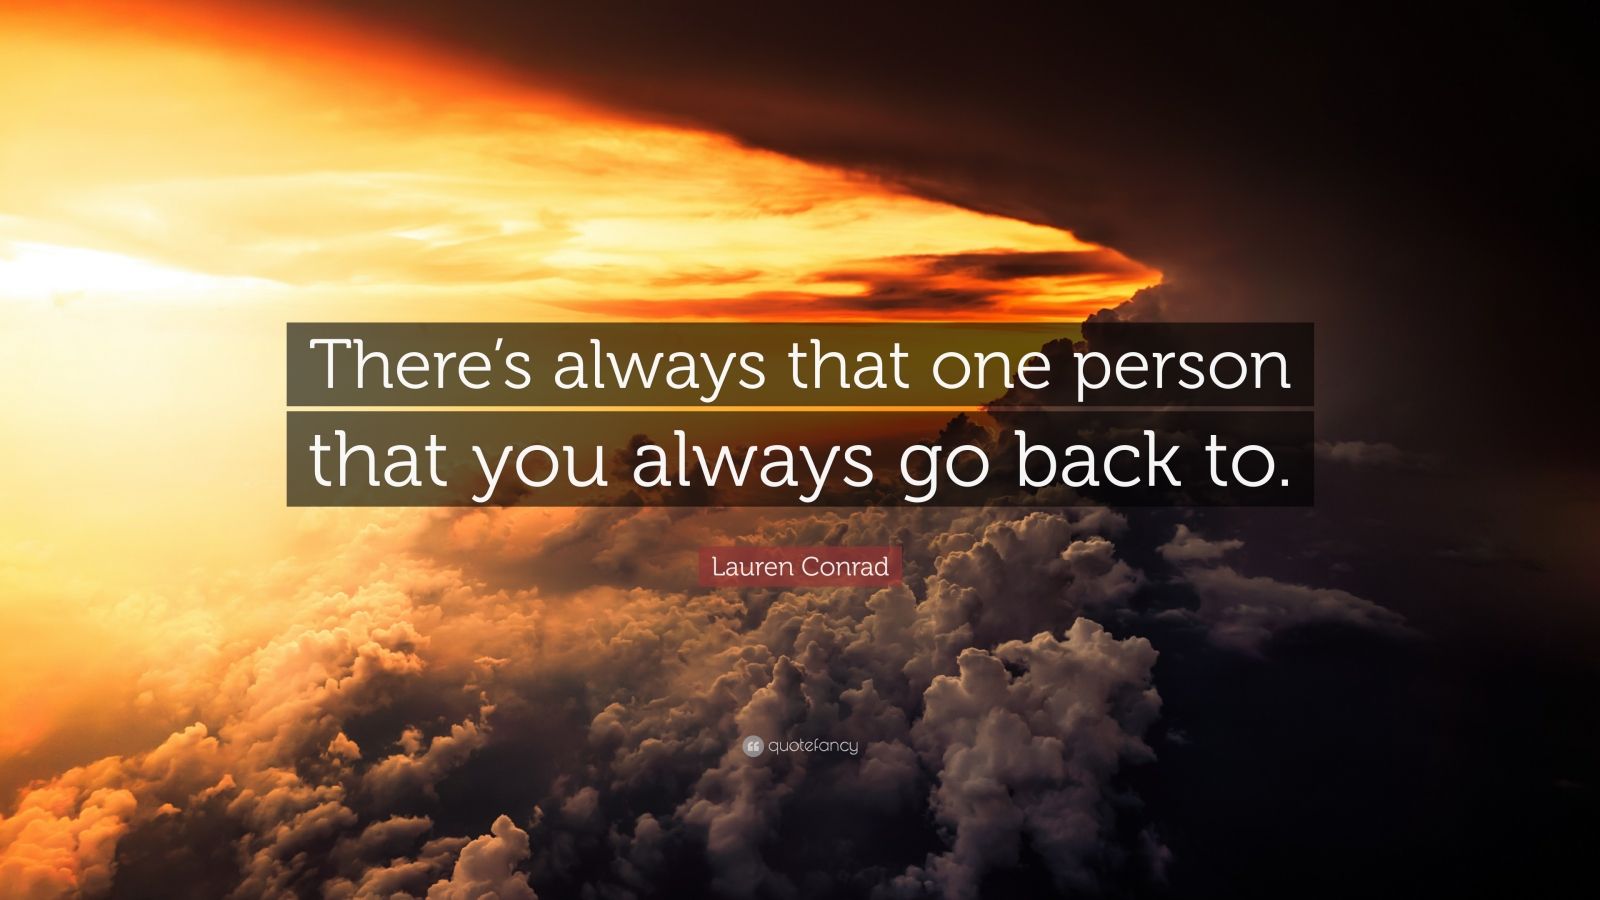 Lauren Conrad Quote “theres Always That One Person That You Always Go Back To” 7 Wallpapers